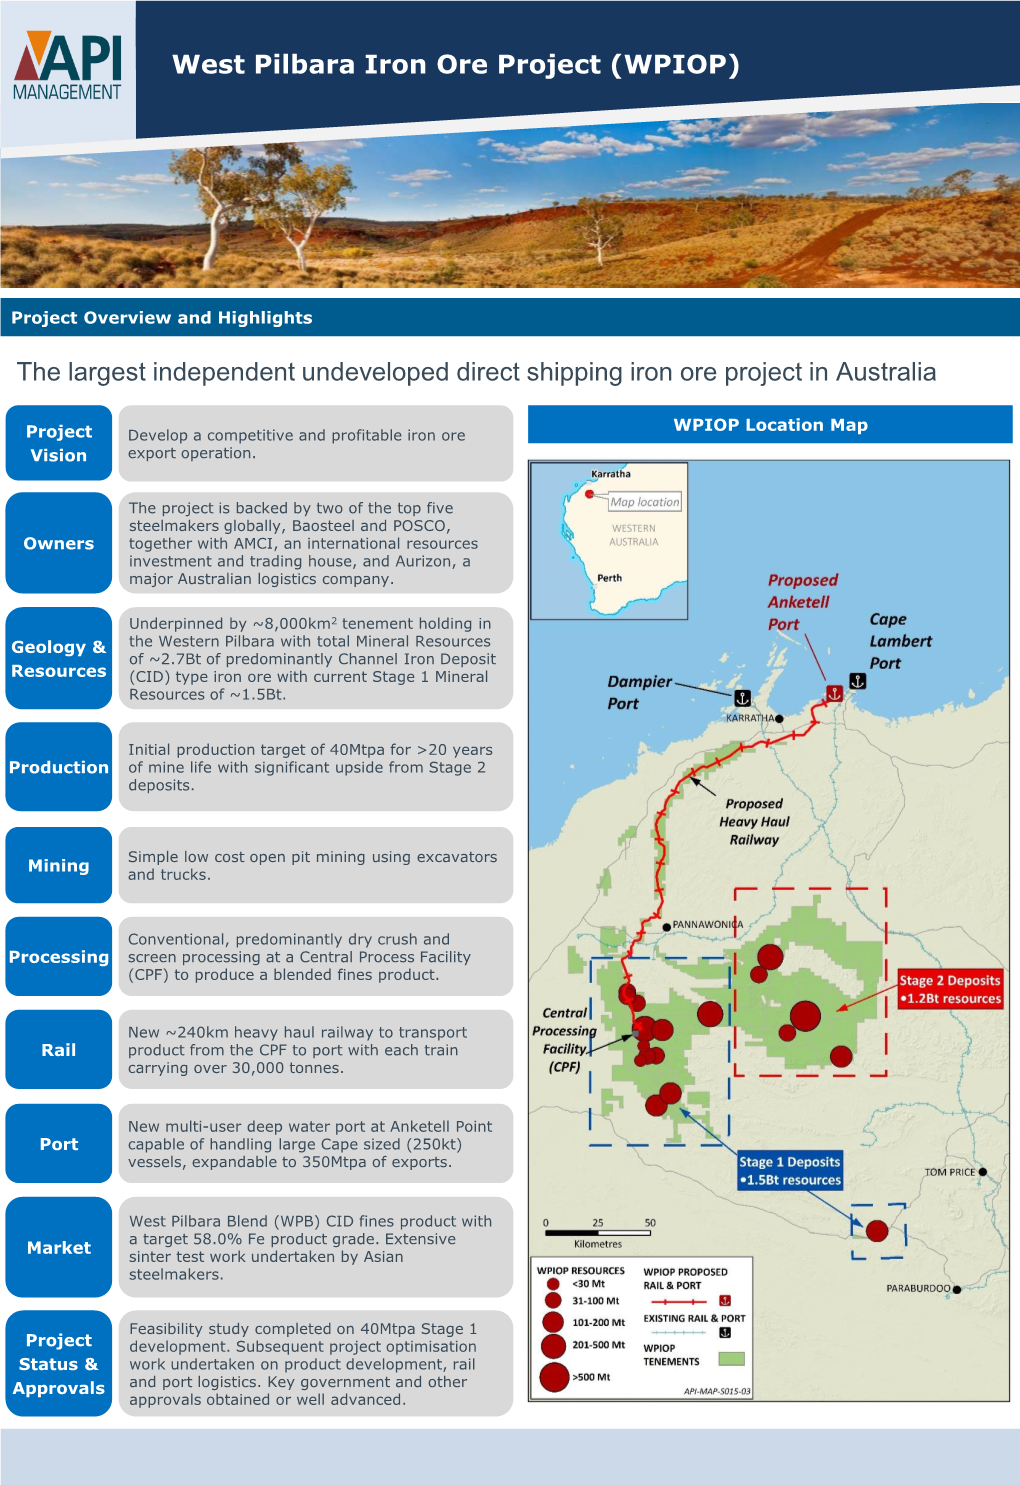 West Pilbara Iron Ore Project (WPIOP) the Largest Independent